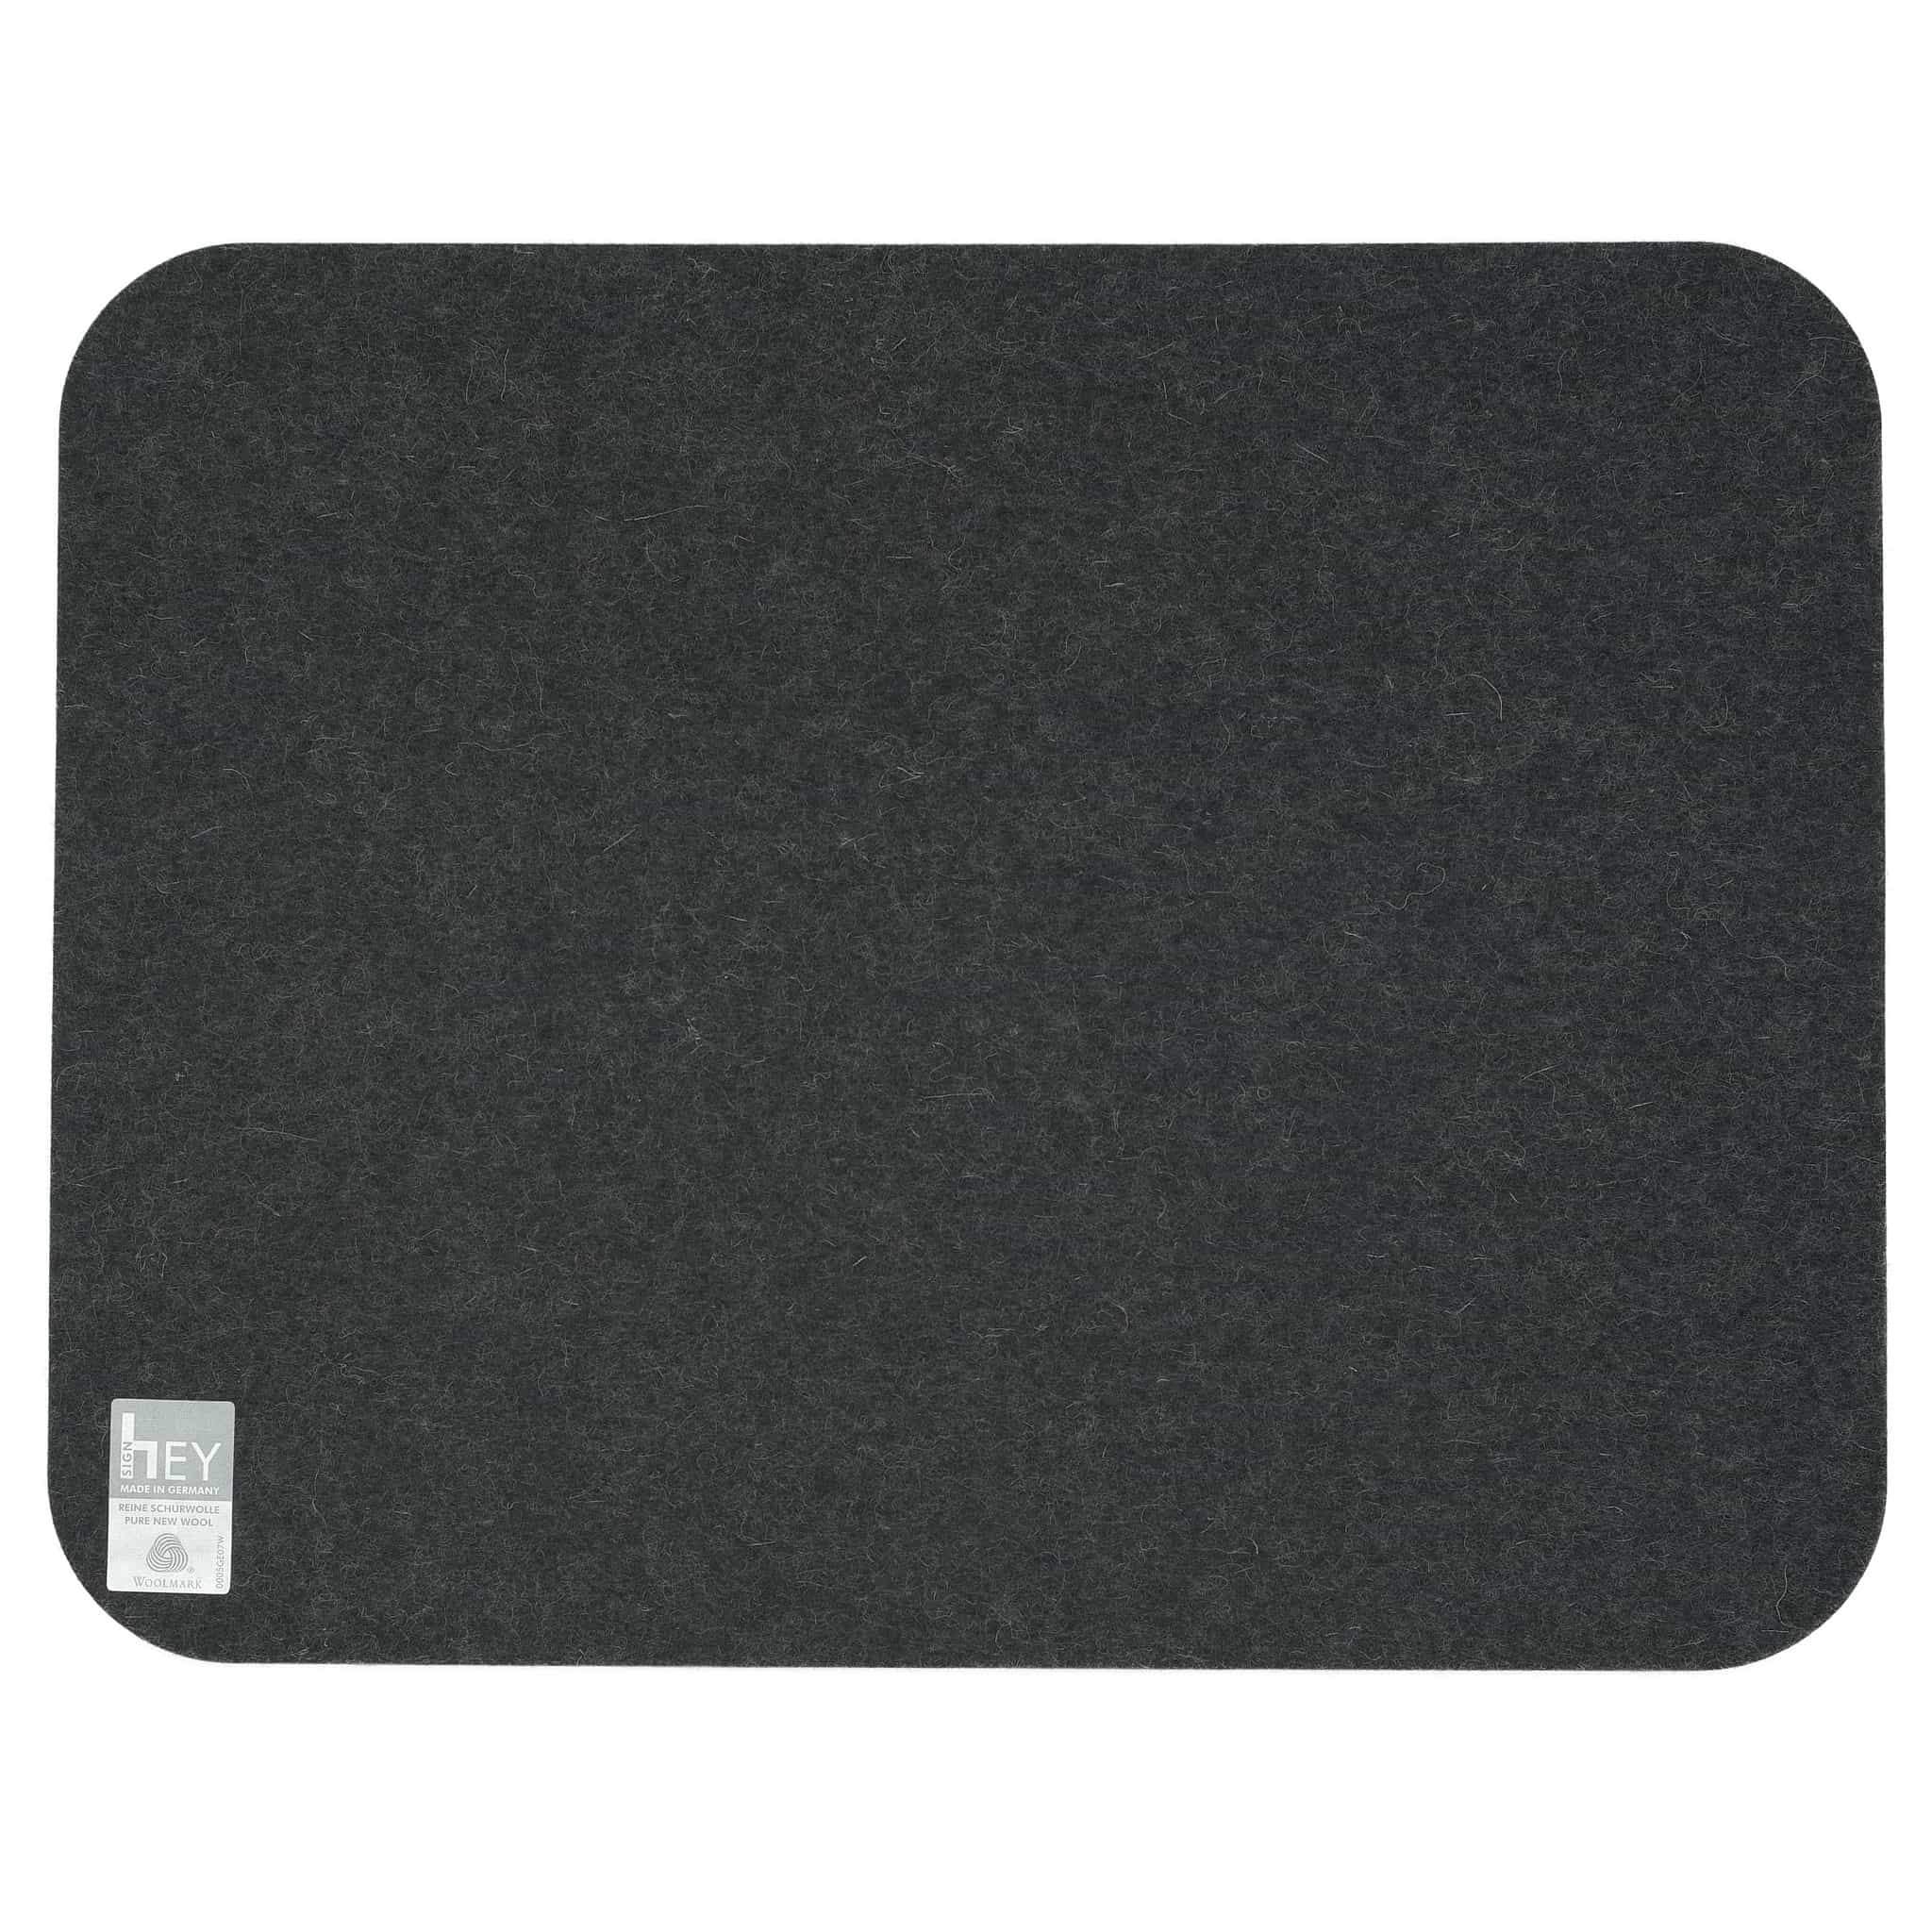 Rectangular Felt Placemat in Graphite by Hey-Sign 300134508 looking at Back